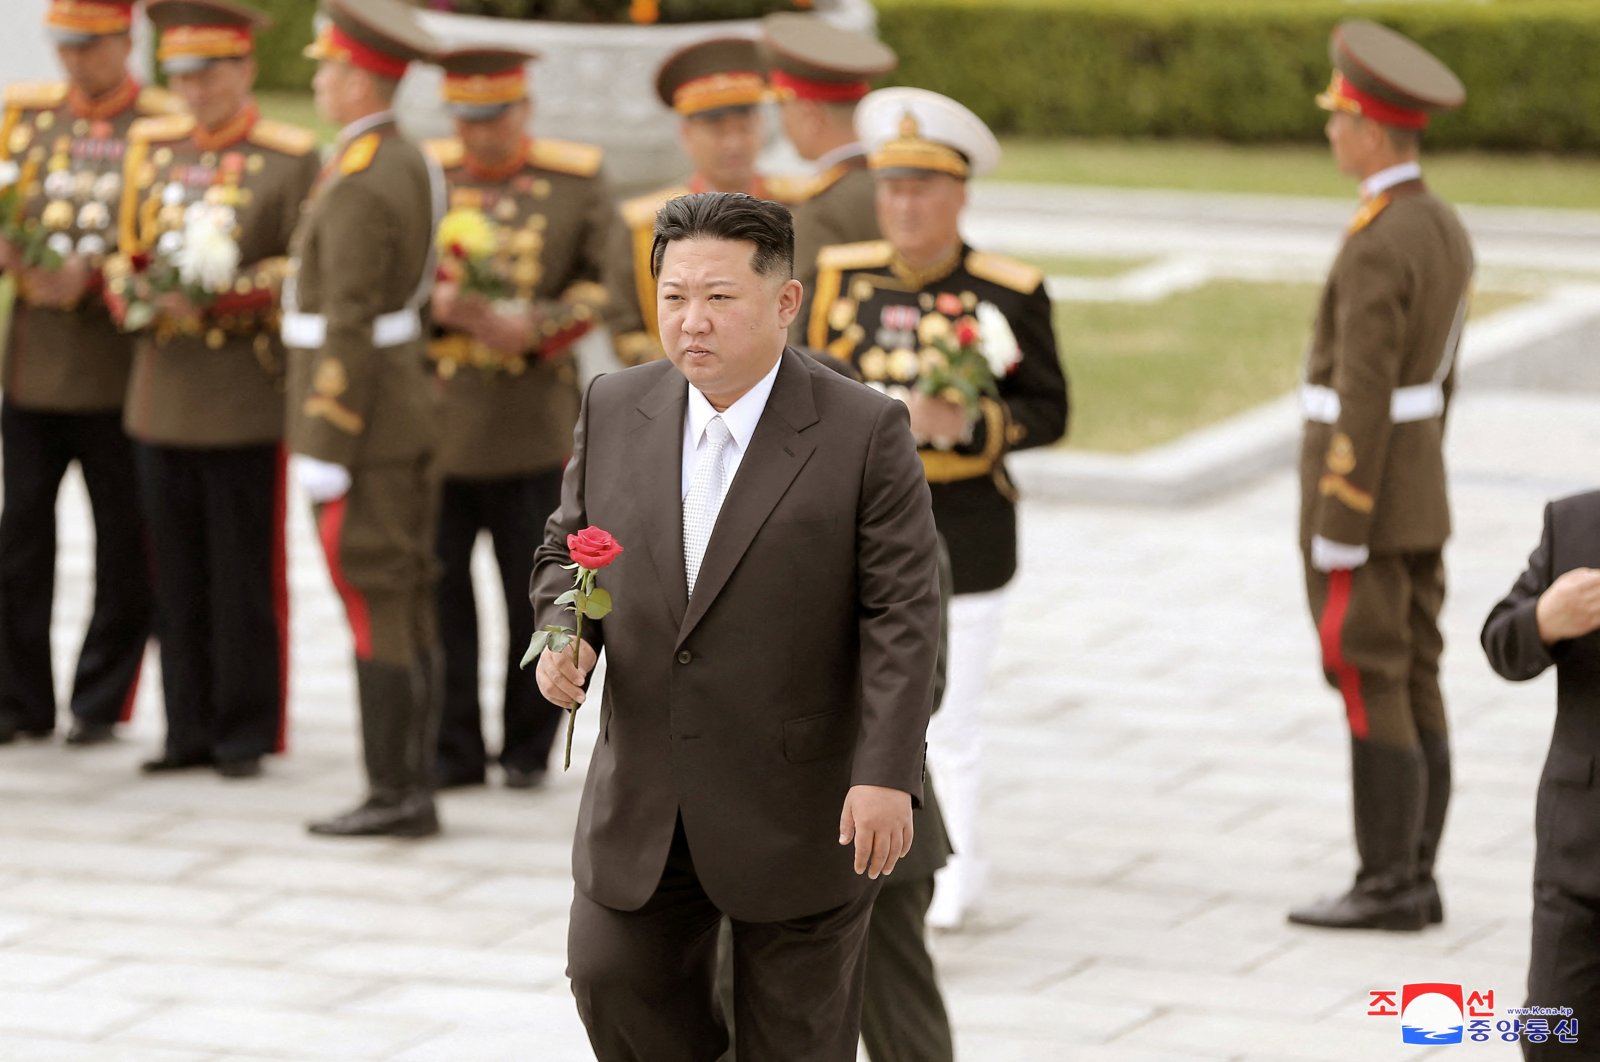 North Korean leader Kim Jong Un walks with a rose in his hand to place it at the Revolutionary Martyrs Cemetery on Mount Daesong to mark the 90th anniversary of the founding of the Korean People&#039;s Revolutionary Army in Pyongyang, North Korea, in this undated photo. (Reuters Photo)